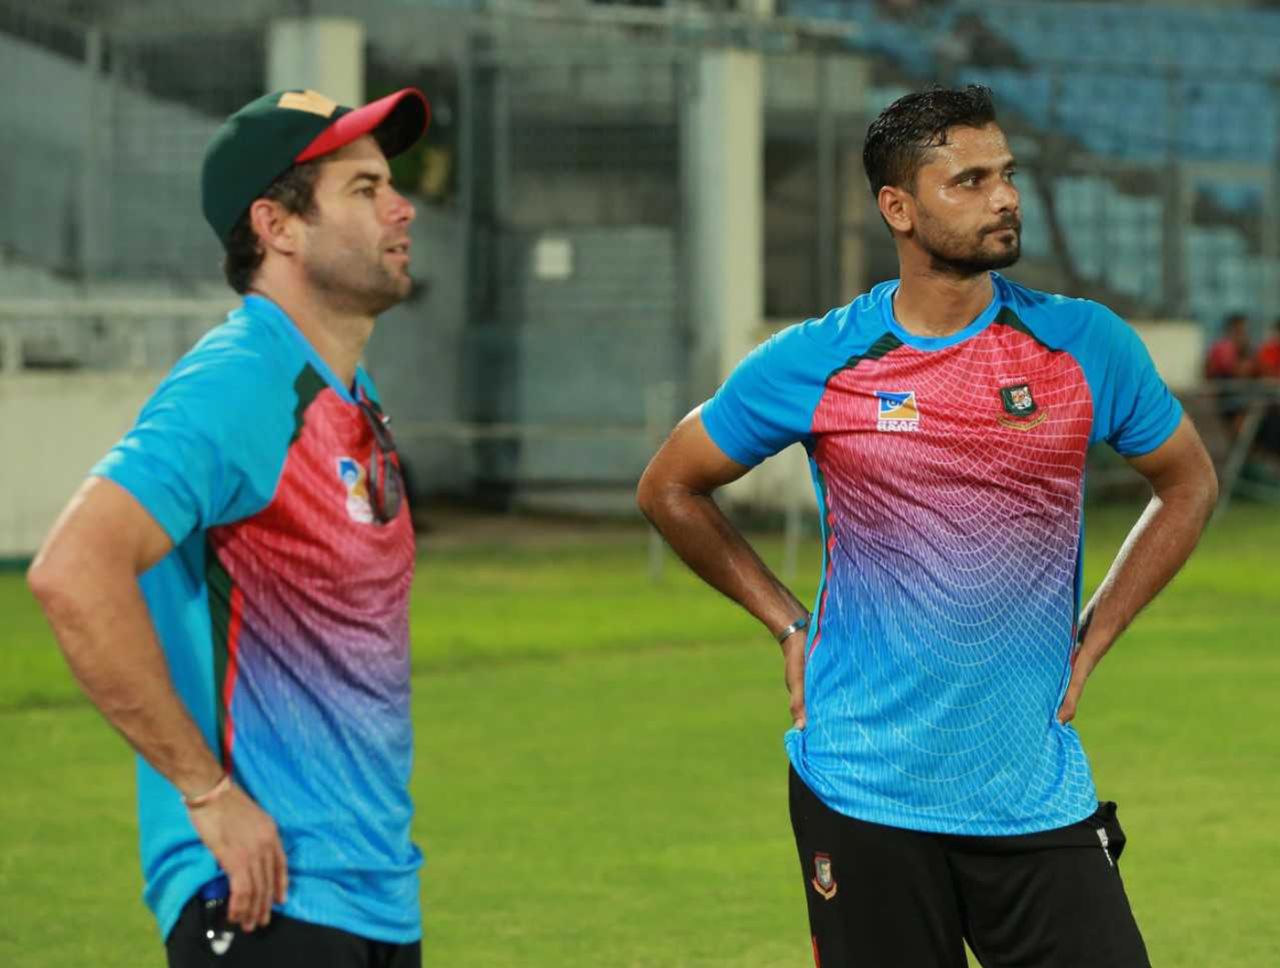 Neil McKenzie and Mashrafe Mortaza have a chat during training, Asia Cup 2018, Dhaka, September 3, 2018